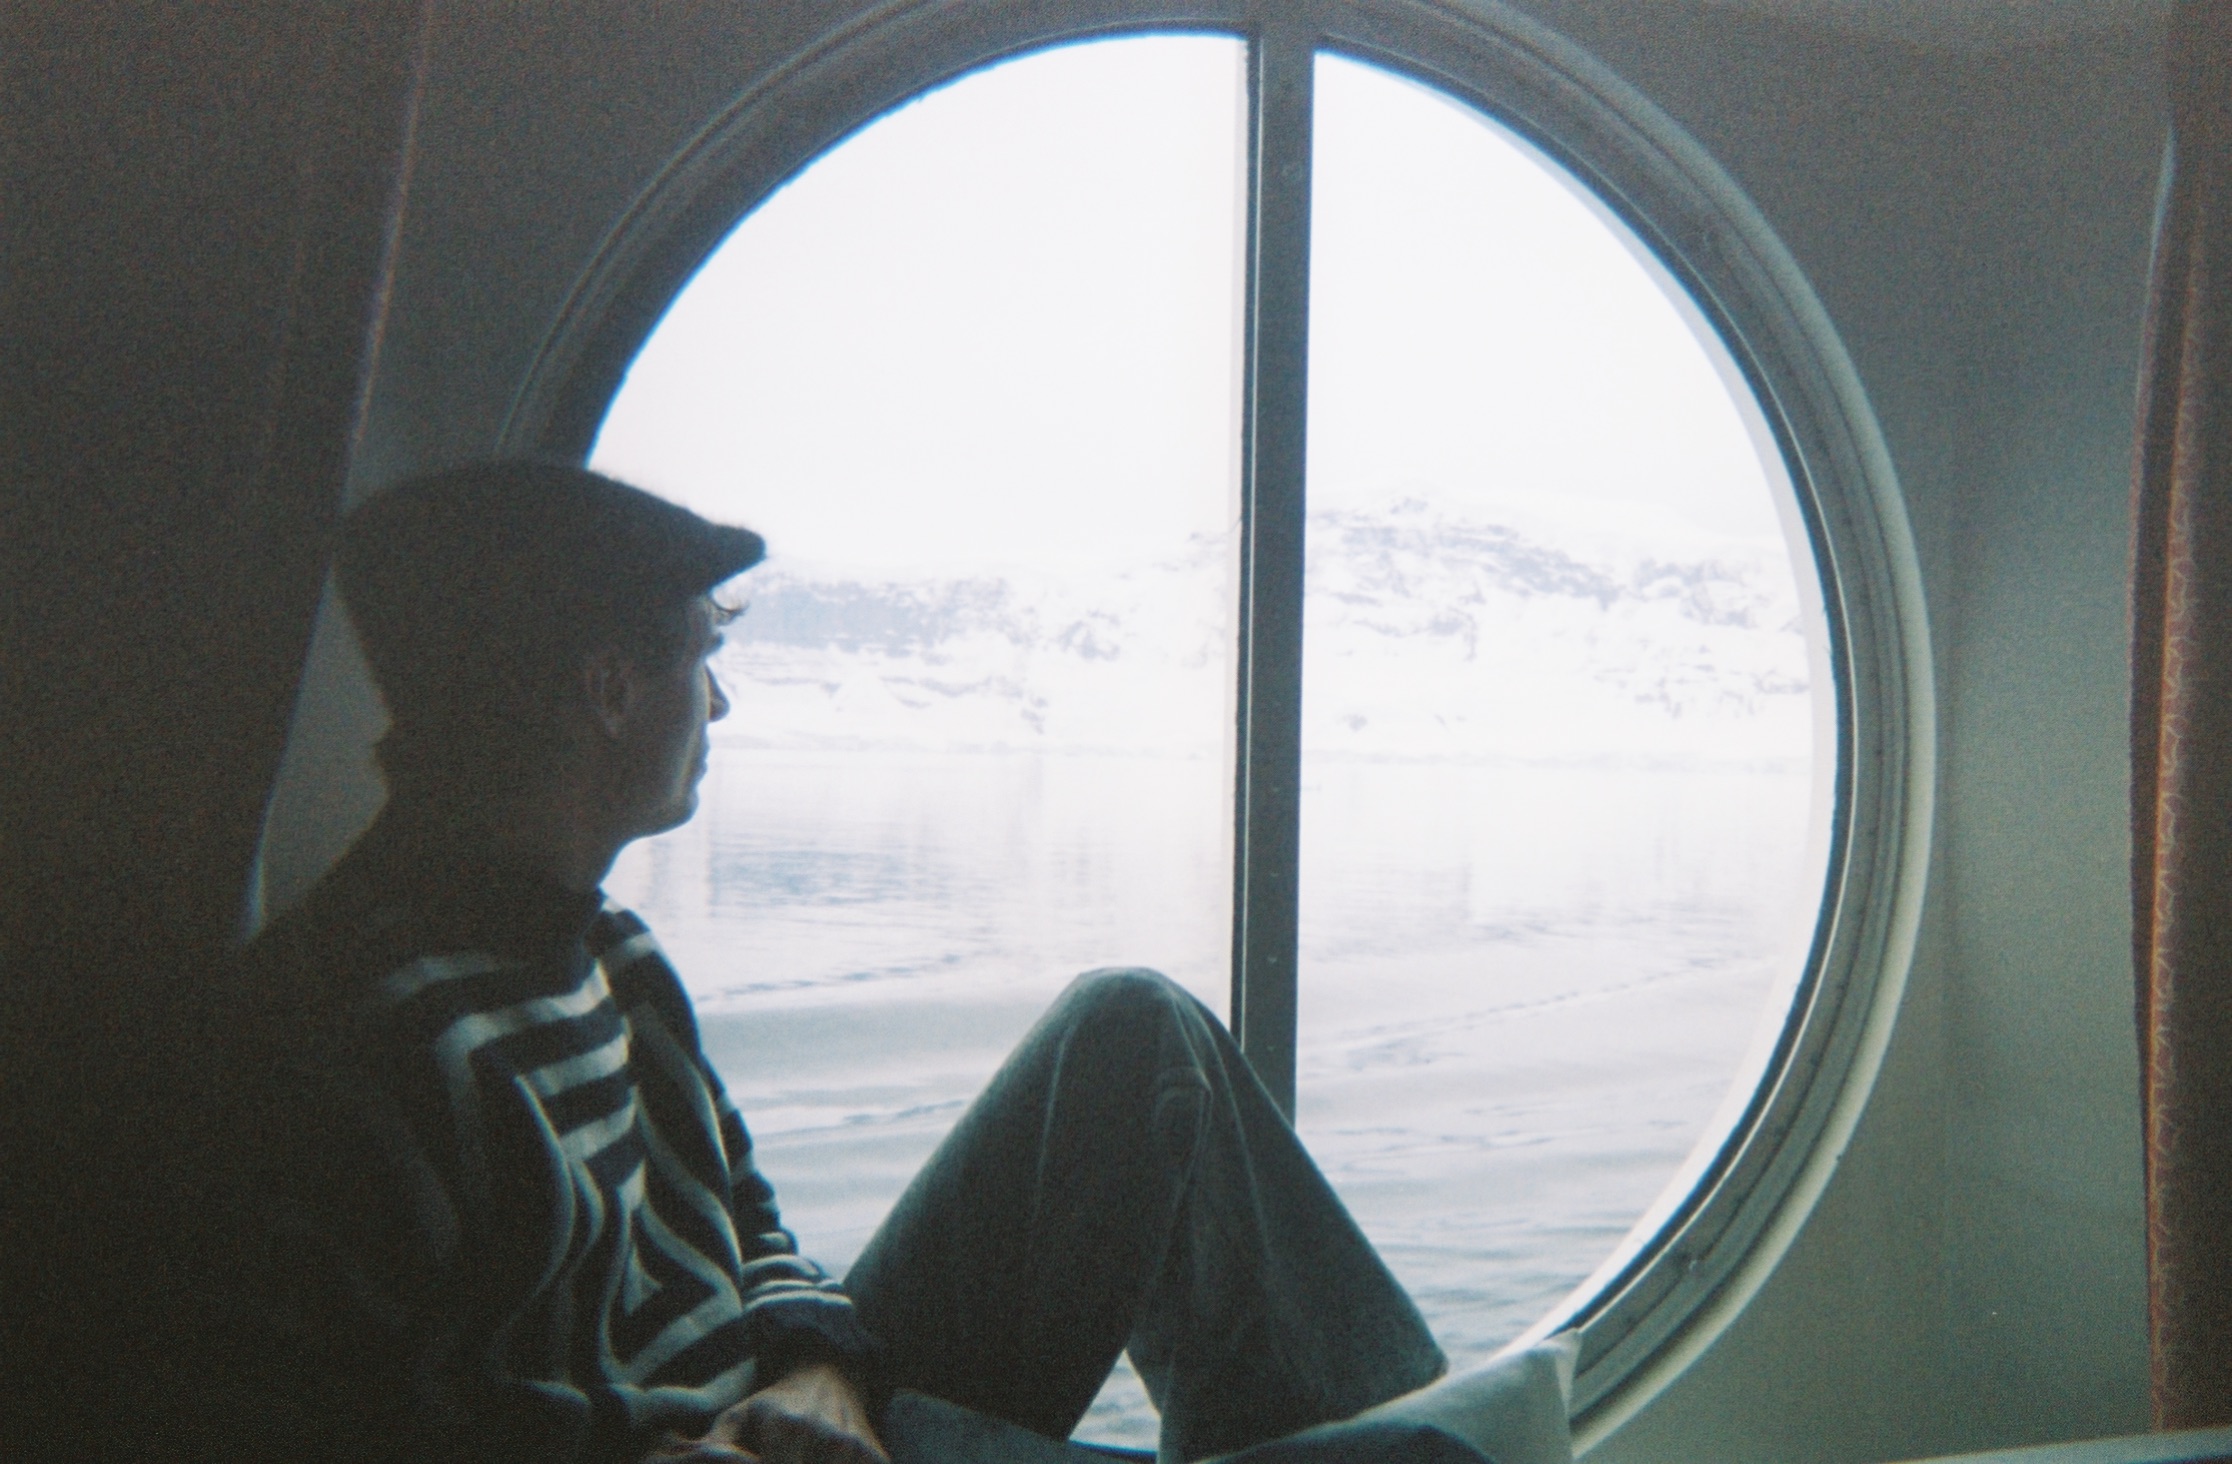 Marc looking out a window on a cruise